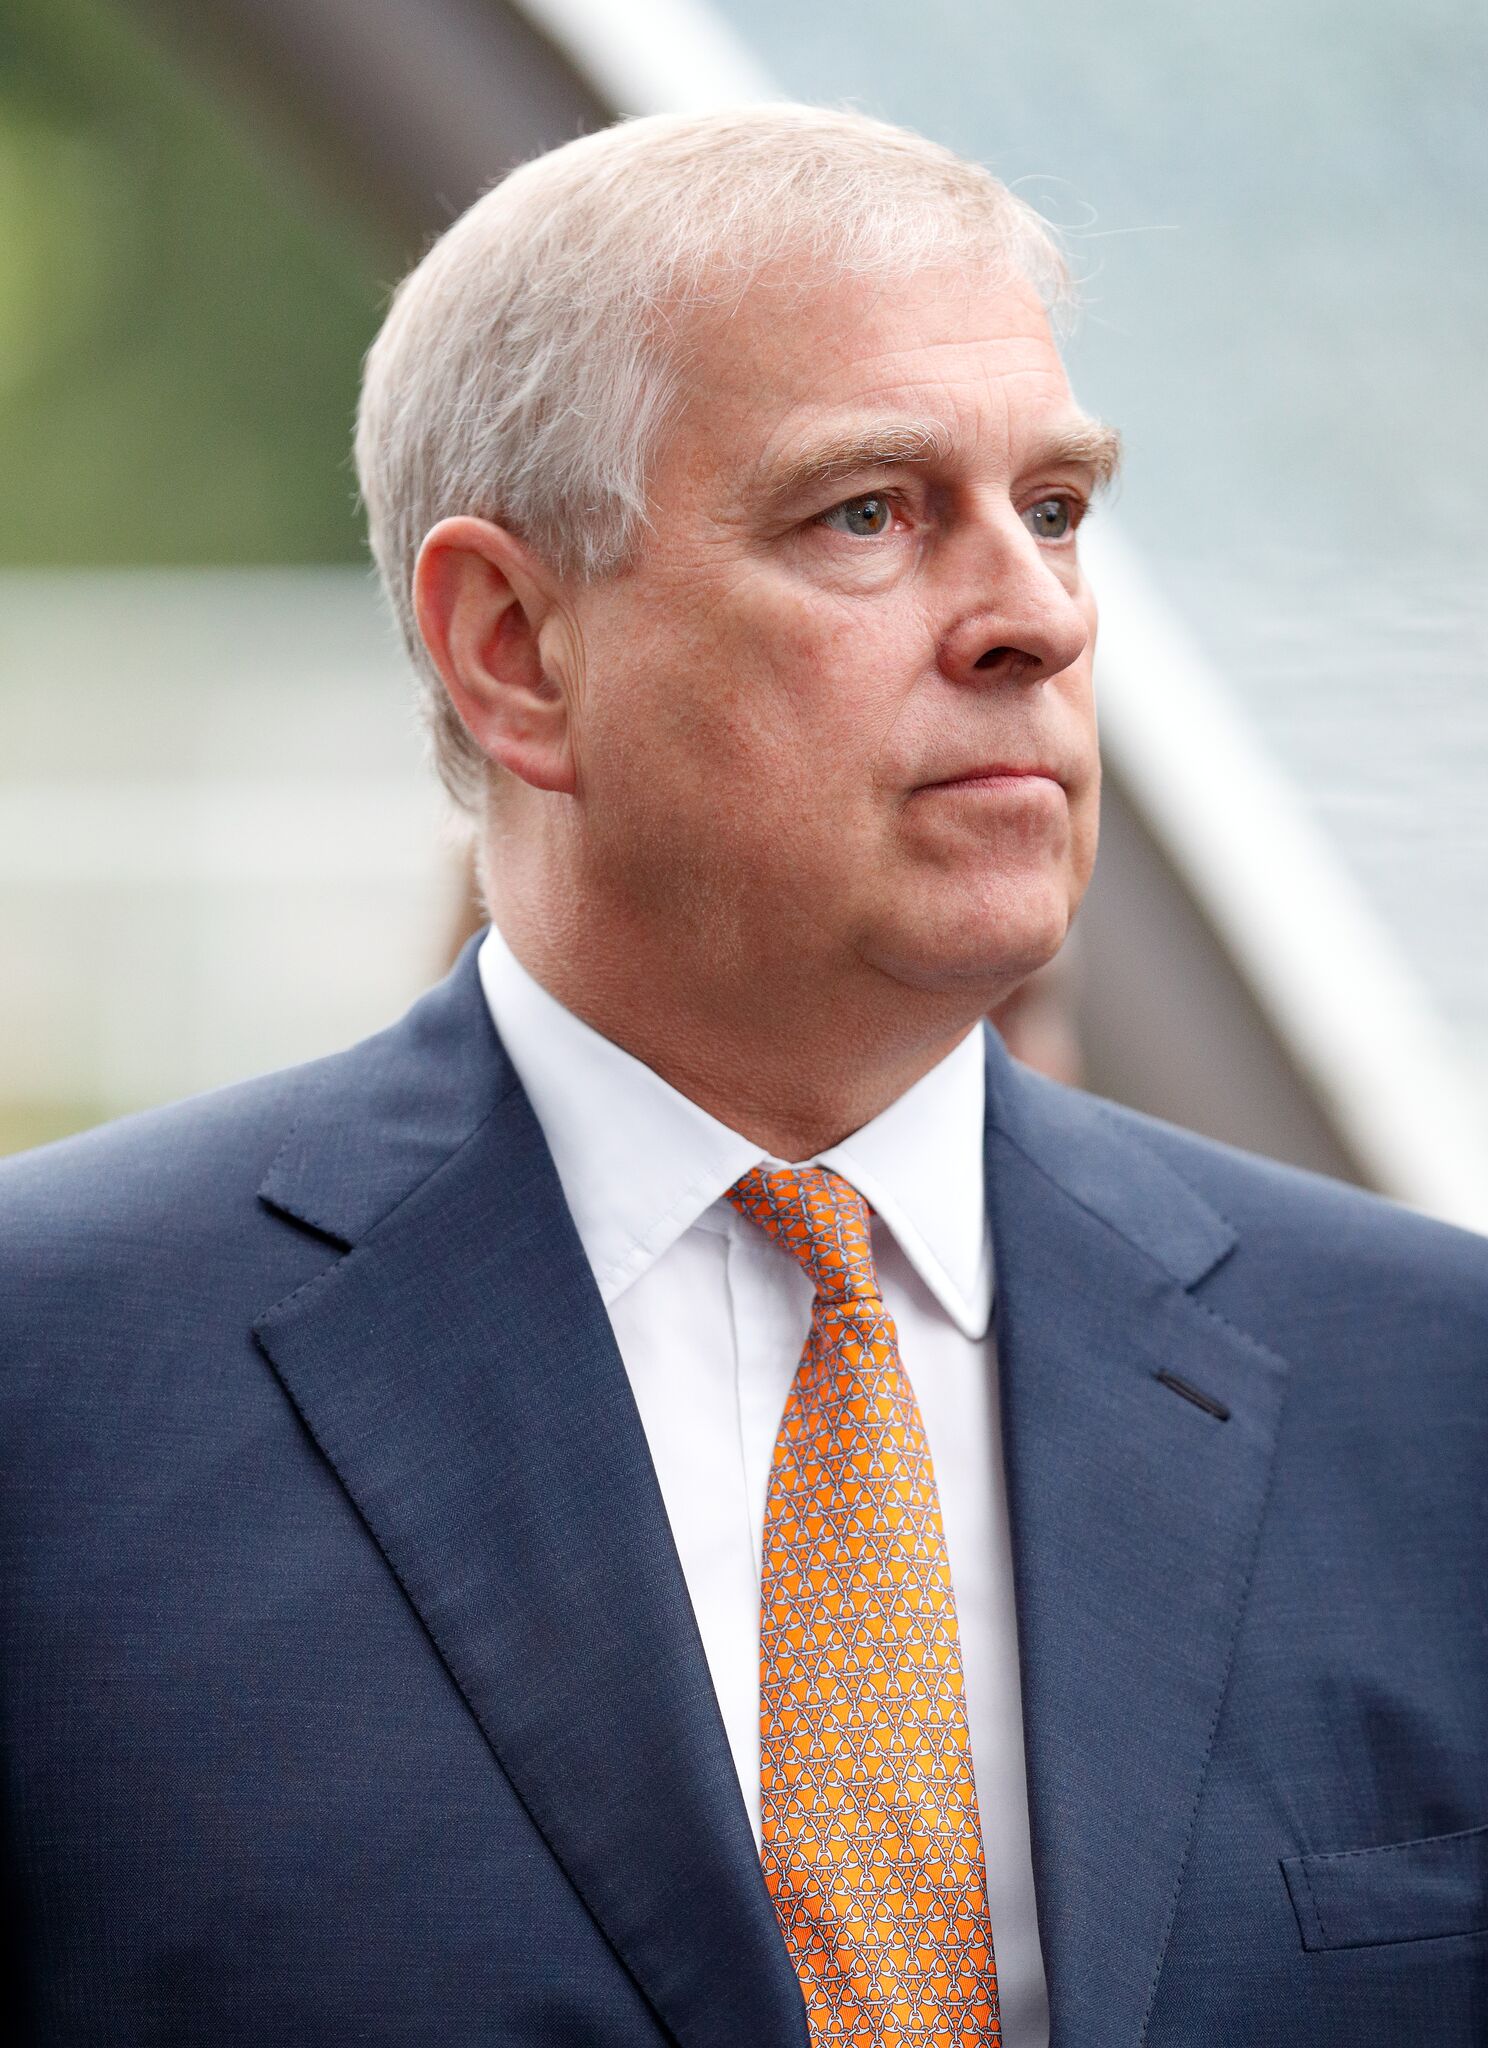 Prince Andrew, Duke of York attends the King George VI racing meet at Ascot Racecourse  | Getty Images